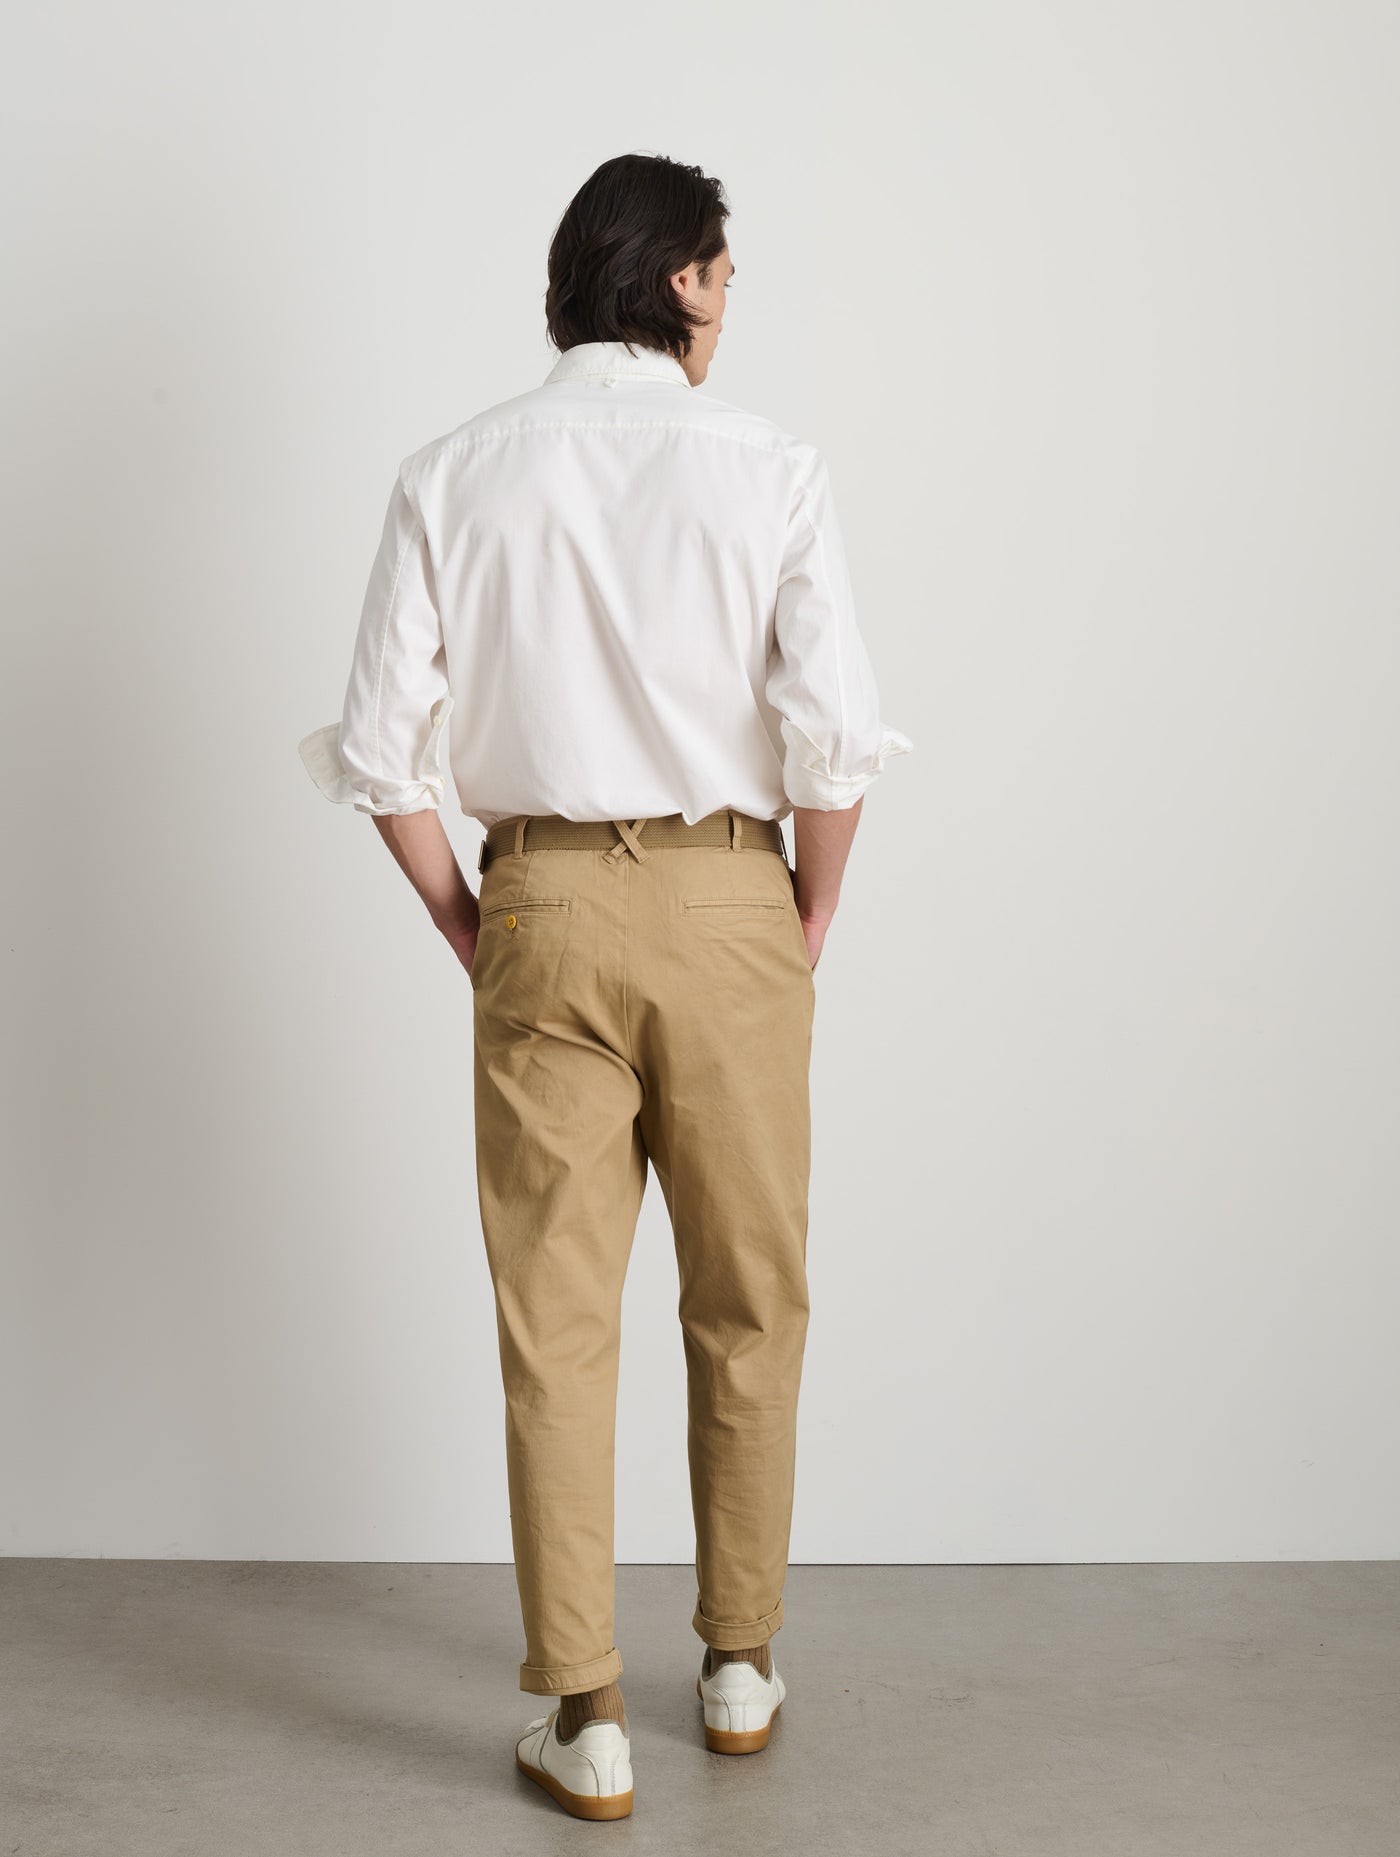 Standard Pleated Pant in Chino (Long Inseam) – Alex Mill